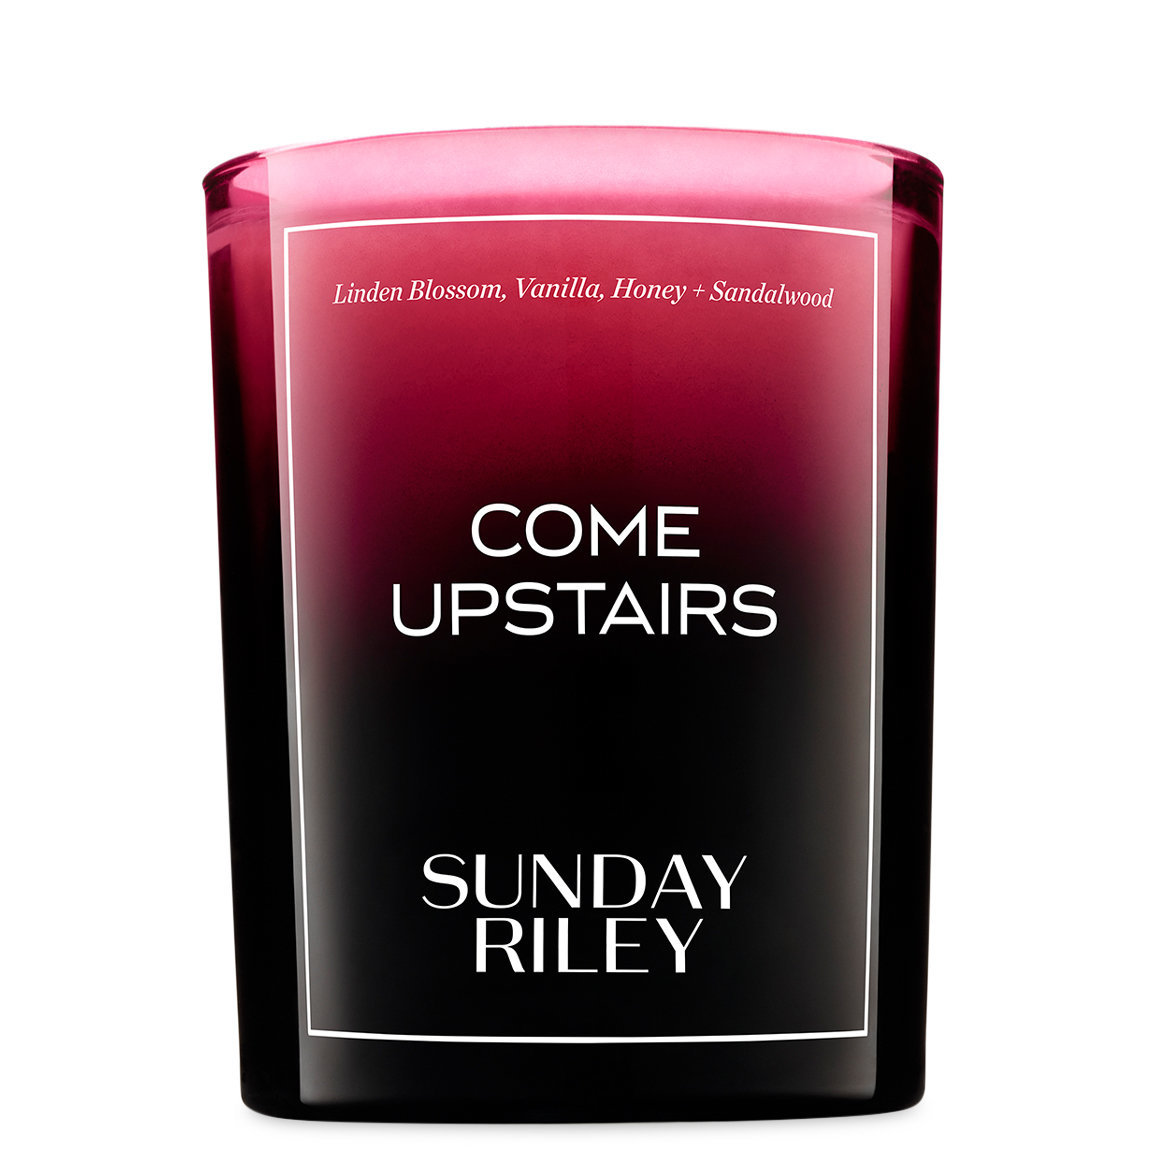 Sunday Riley Come Upstairs Candle alternative view 1 - product swatch.